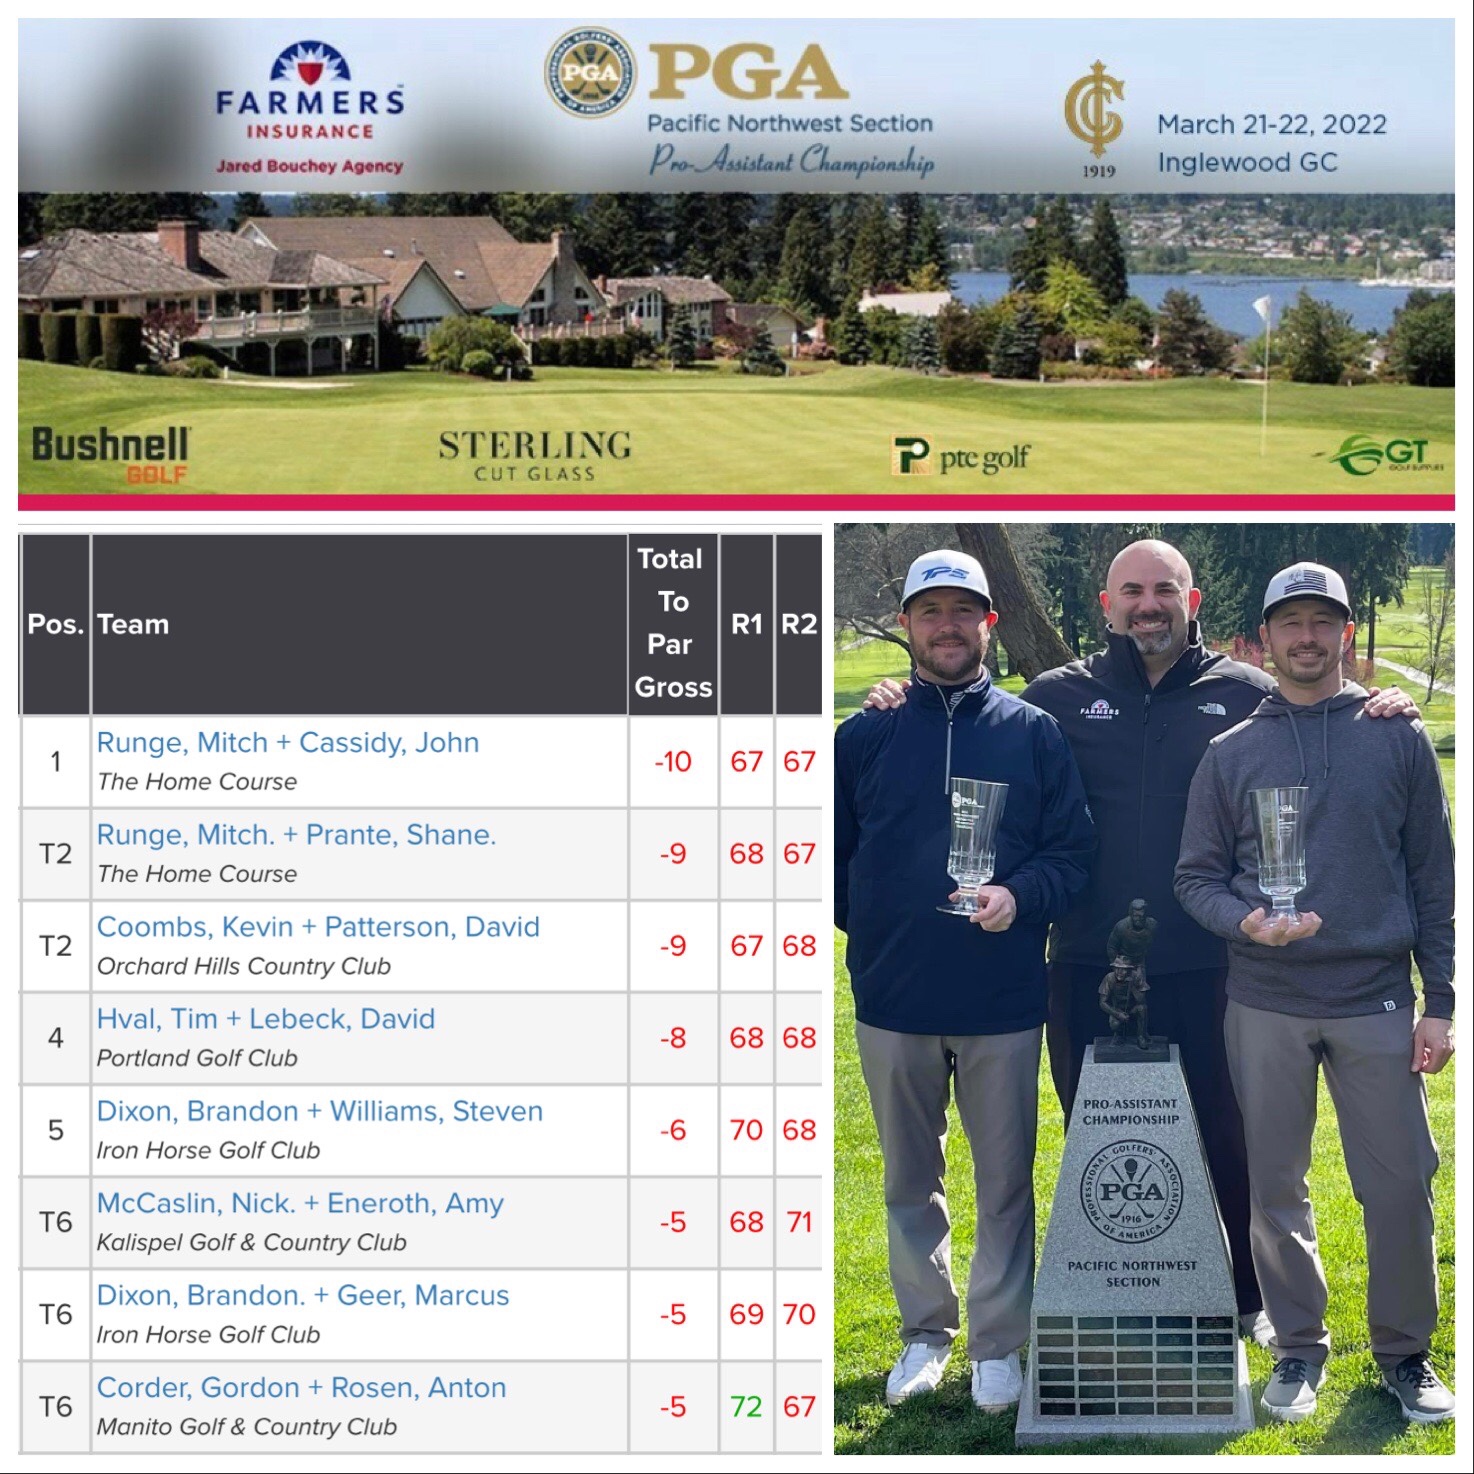 🏡Final The Home Course duo of Runge and Cassidy team to win PNW PGA